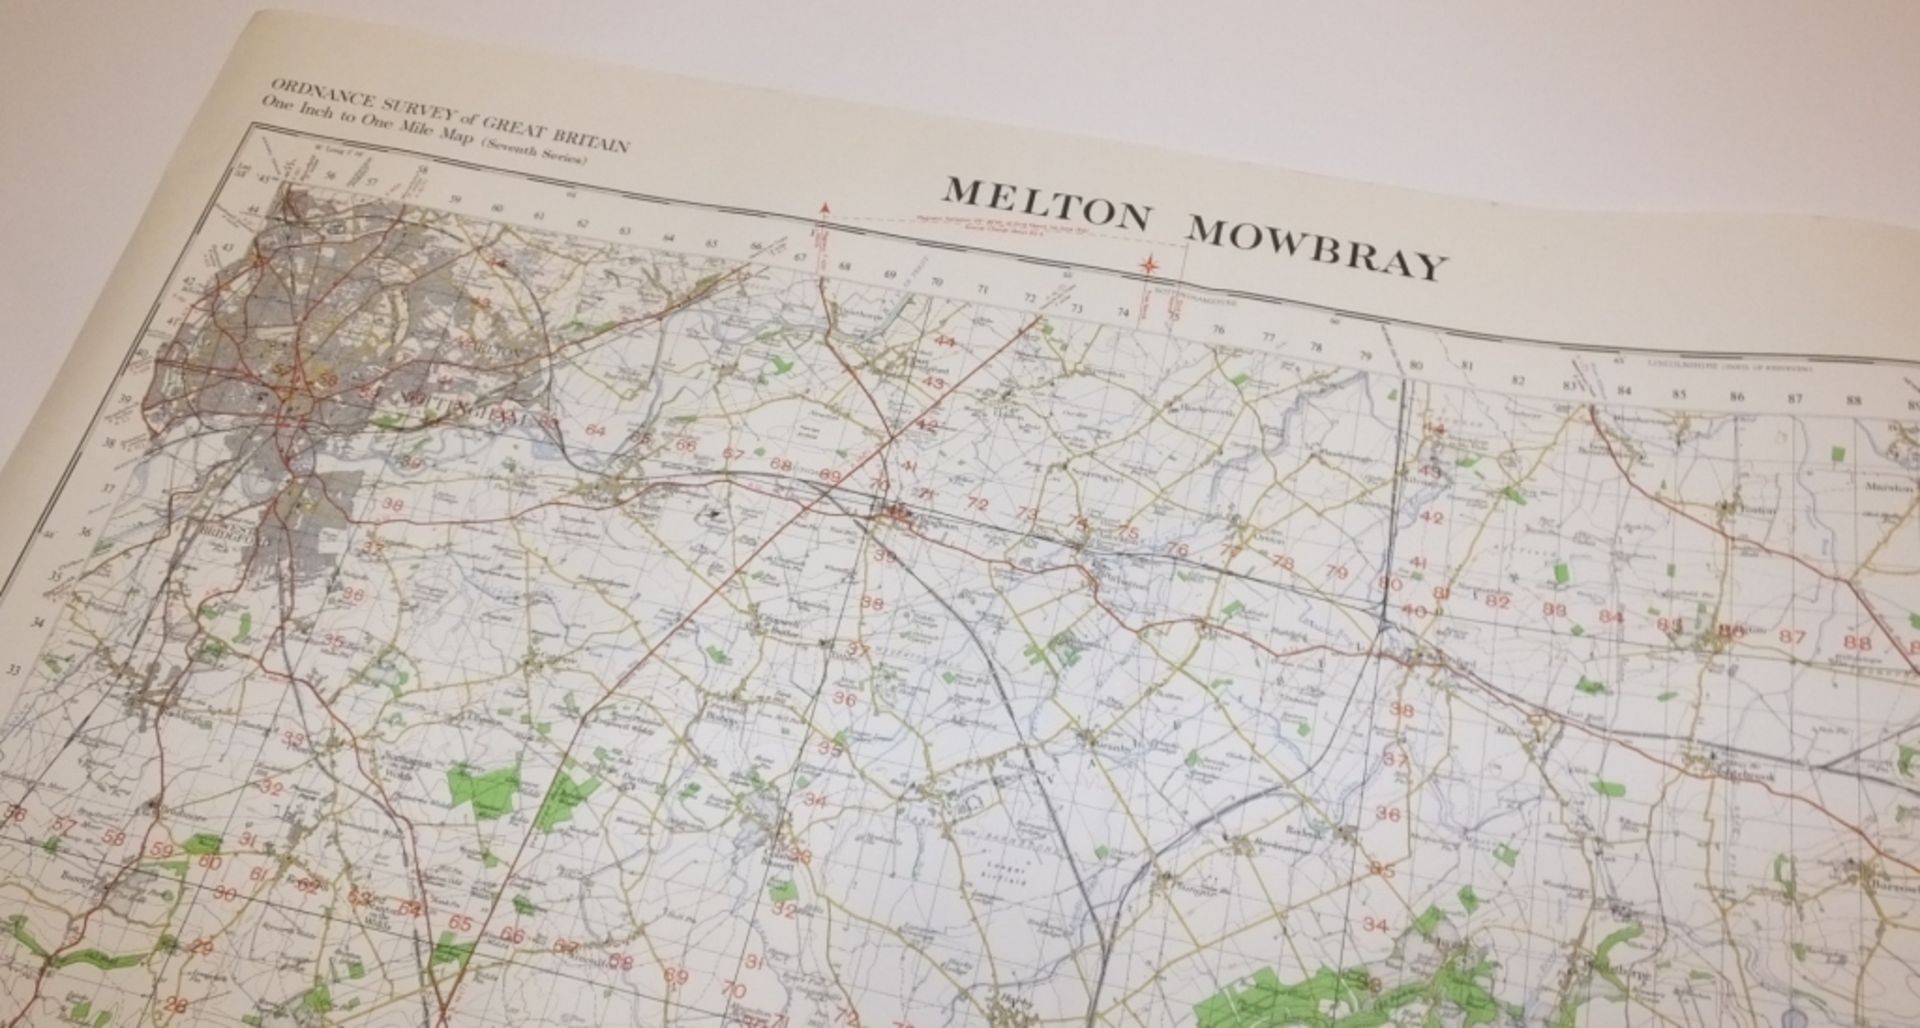 26x ENGLAND & WALES MAP MELTON MOWBRAY 1INCH 1MILE 1961 7TH SERIES 3GSGS SHEET 122 - Image 3 of 4